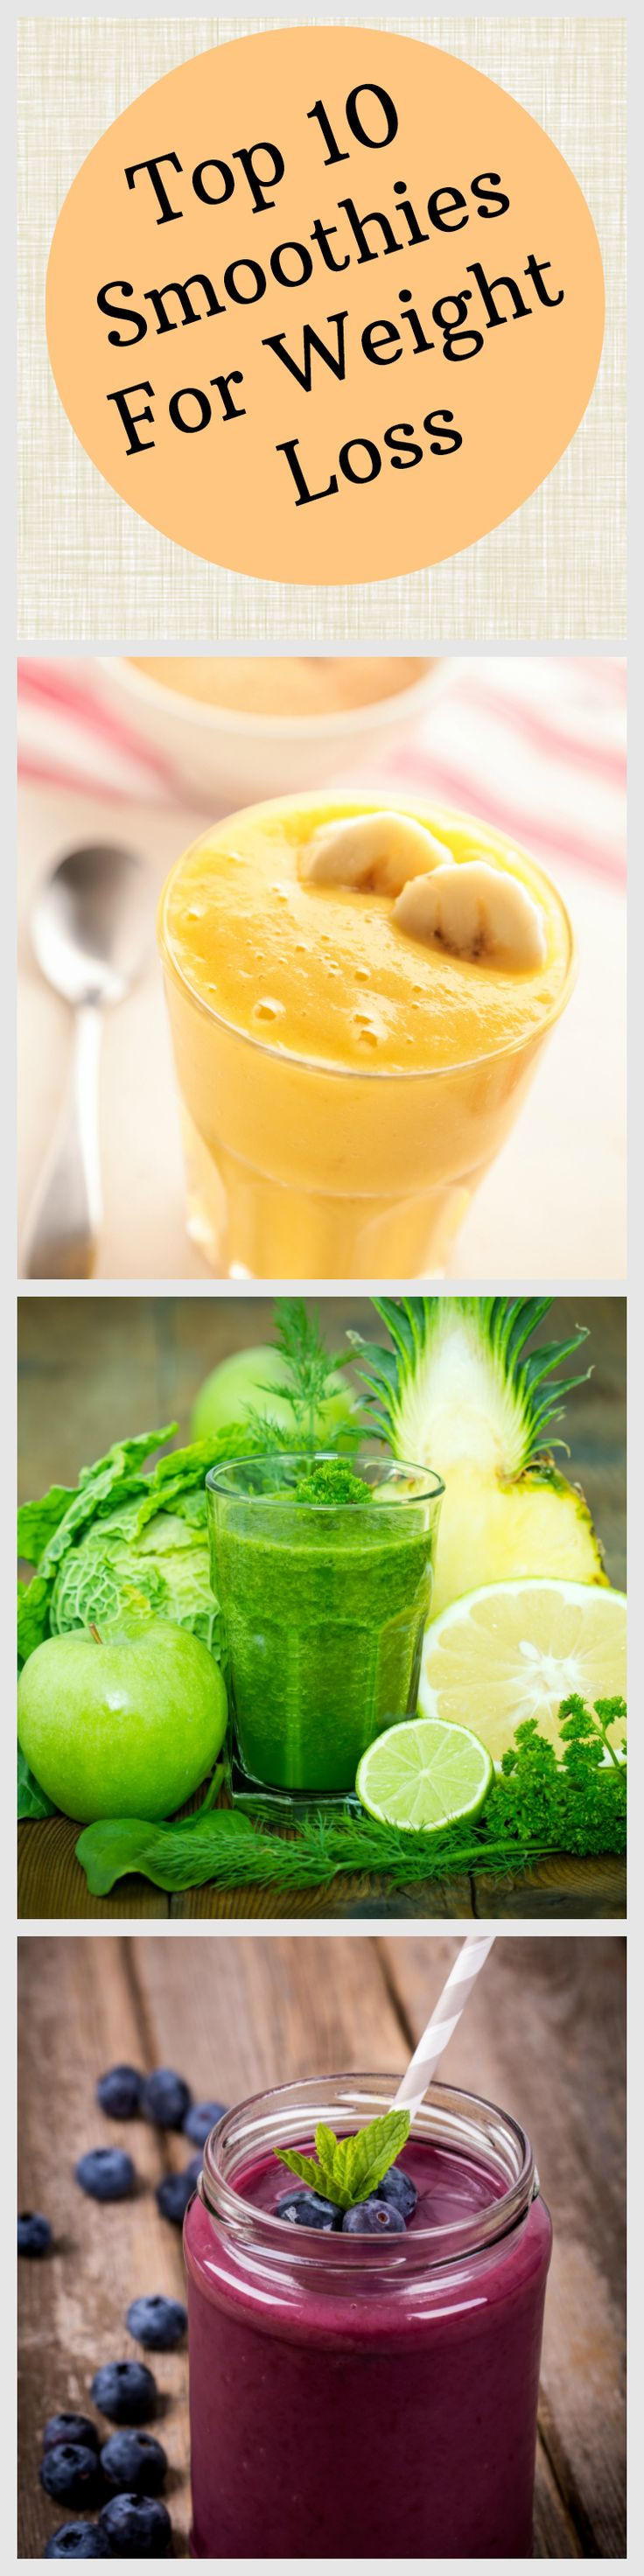 The Best Smoothies For Weight Loss
 Nutribullet smoothies